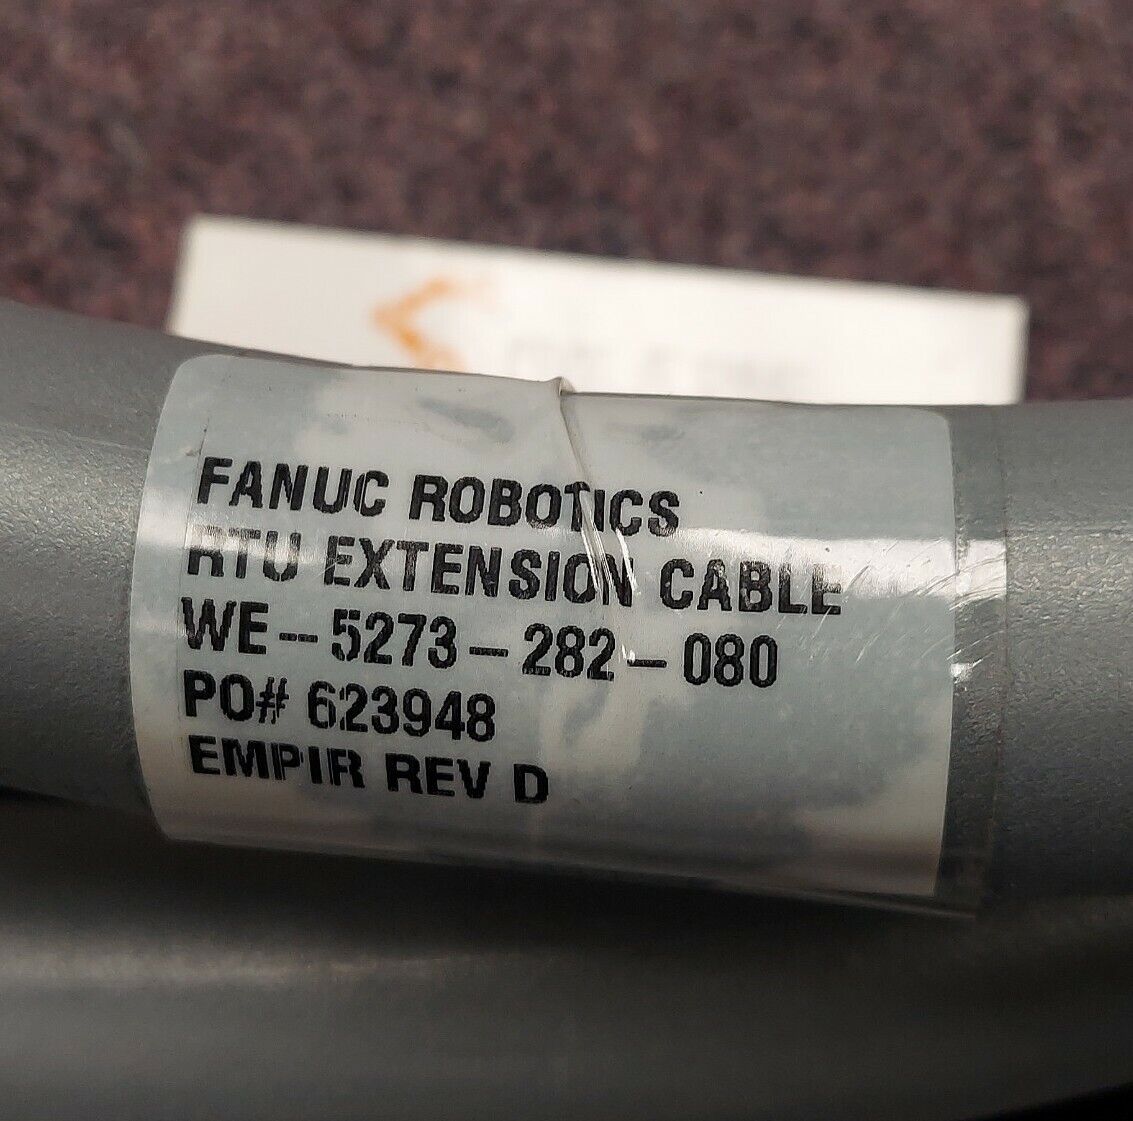 Fanuc WE-5273-282-080 RTU Extension Cable 46-Pin 8 Meters (OV107) - 0